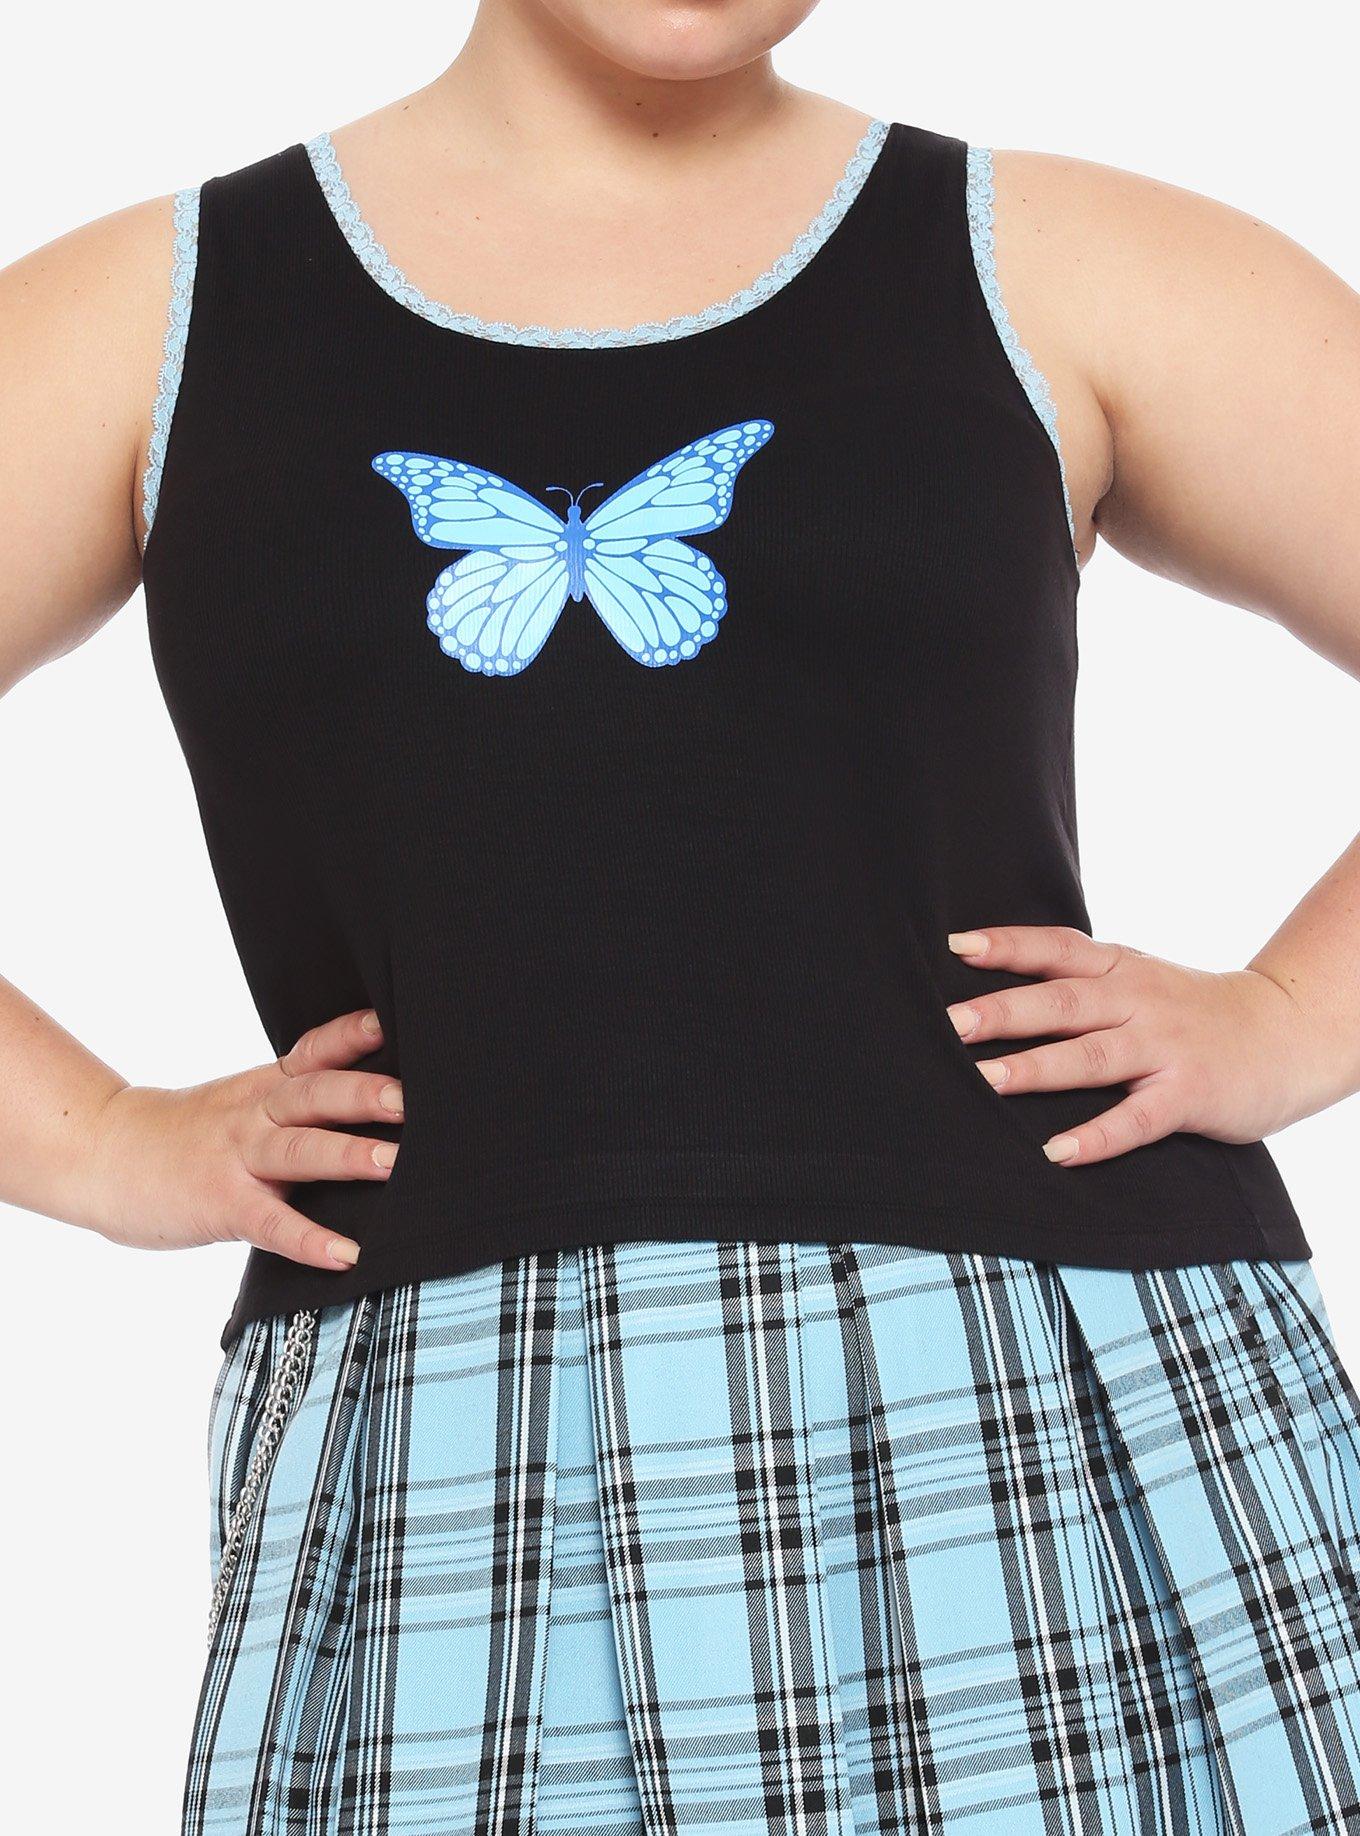 Blue Butterfly Lace Girls Tank Top Plus Size, BLACK, hi-res